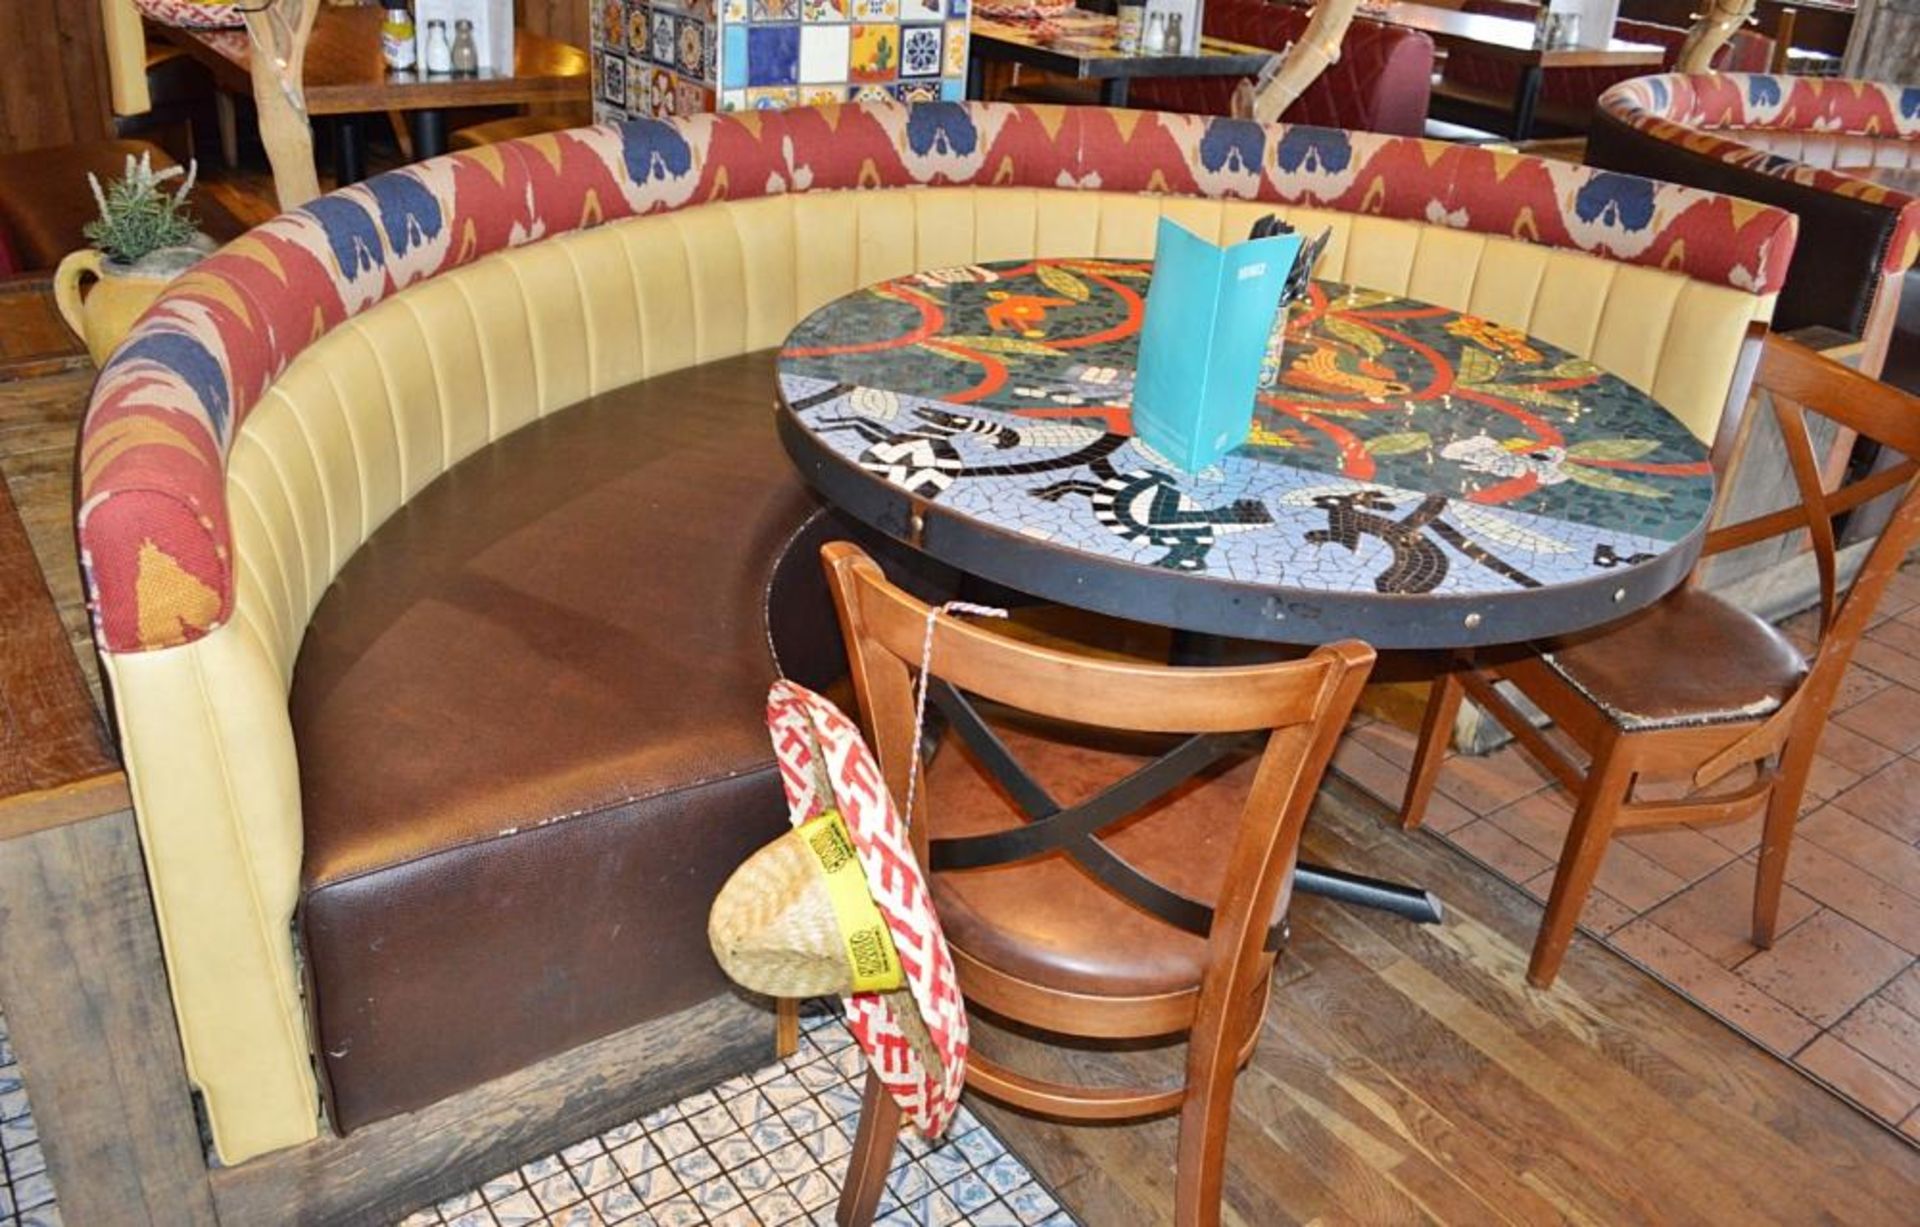 2 x Half Circle Seating Booths / Banquet Seating - Faux Leather Brown Seating With Yellow and Brown